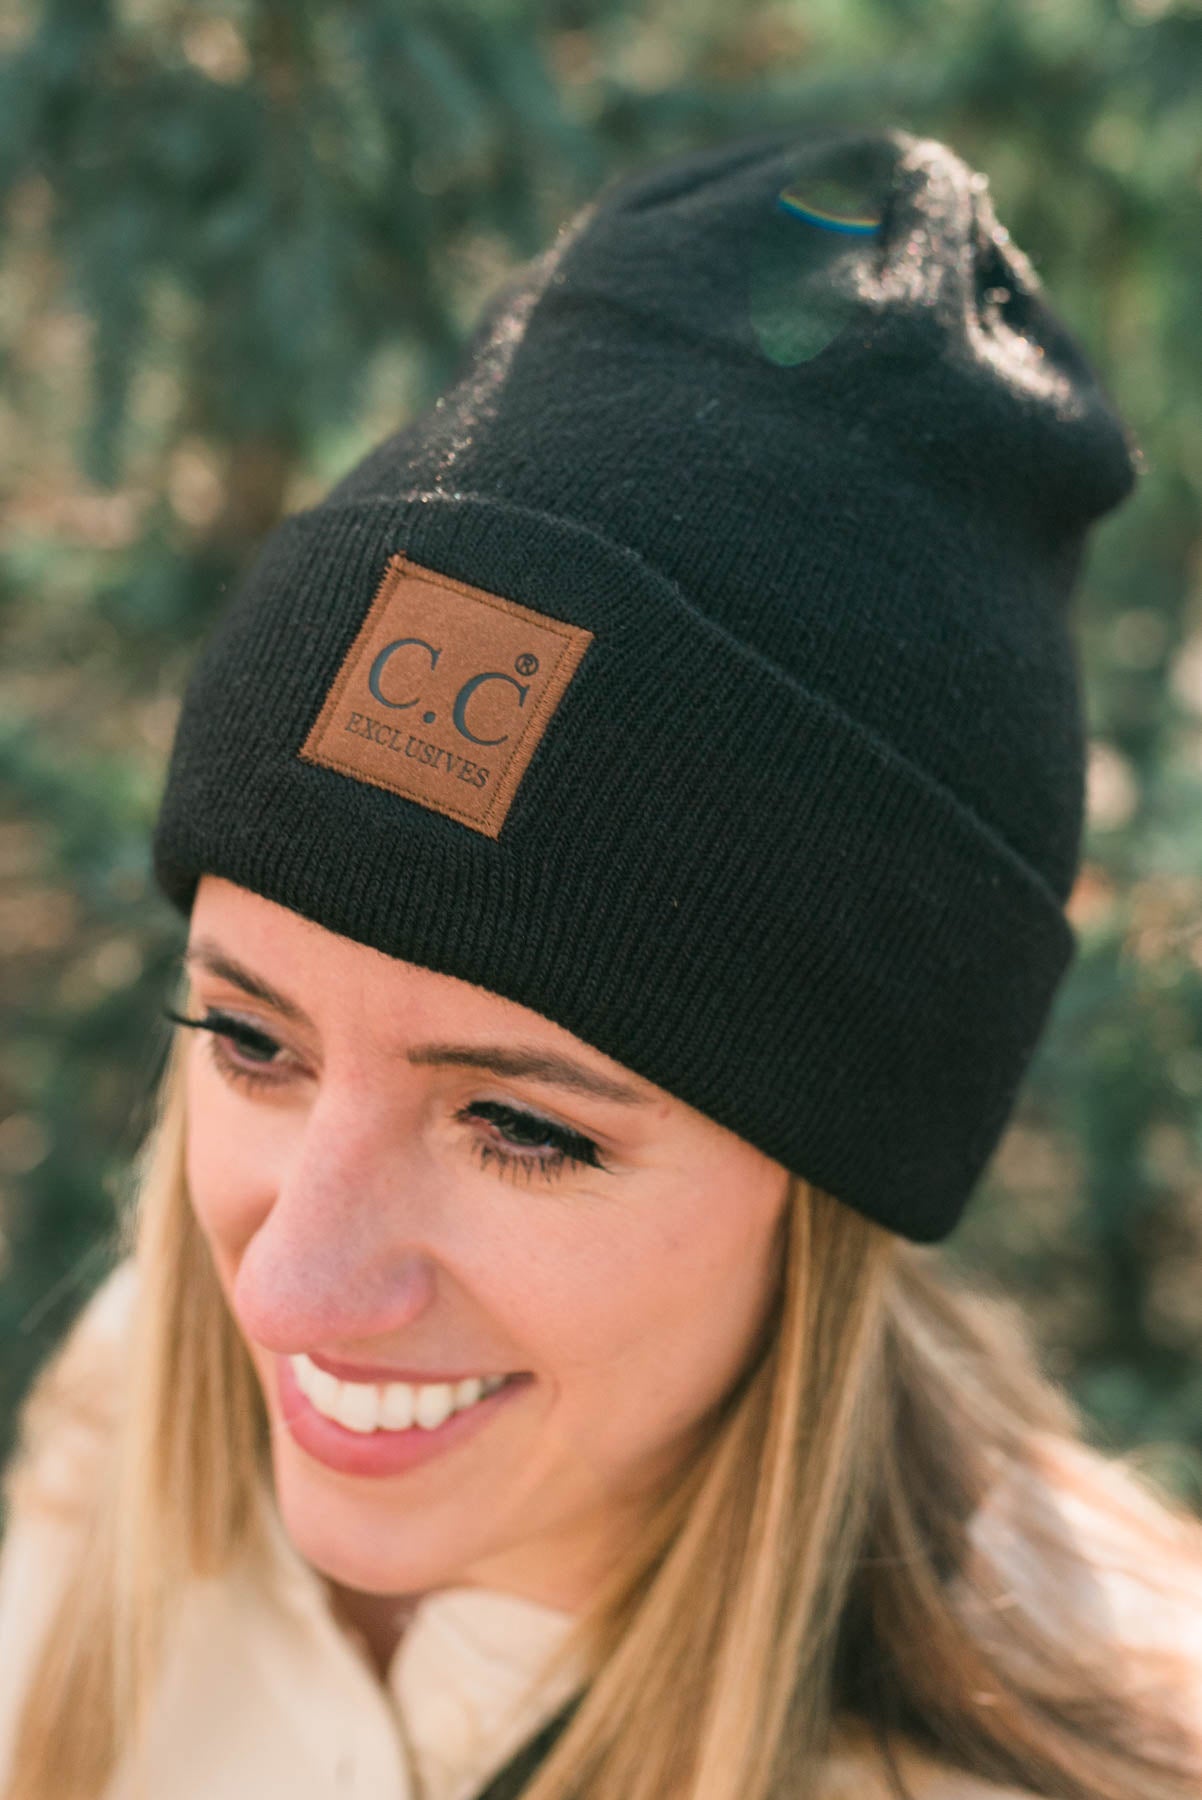 Black knit beanie with brown C.C. patch